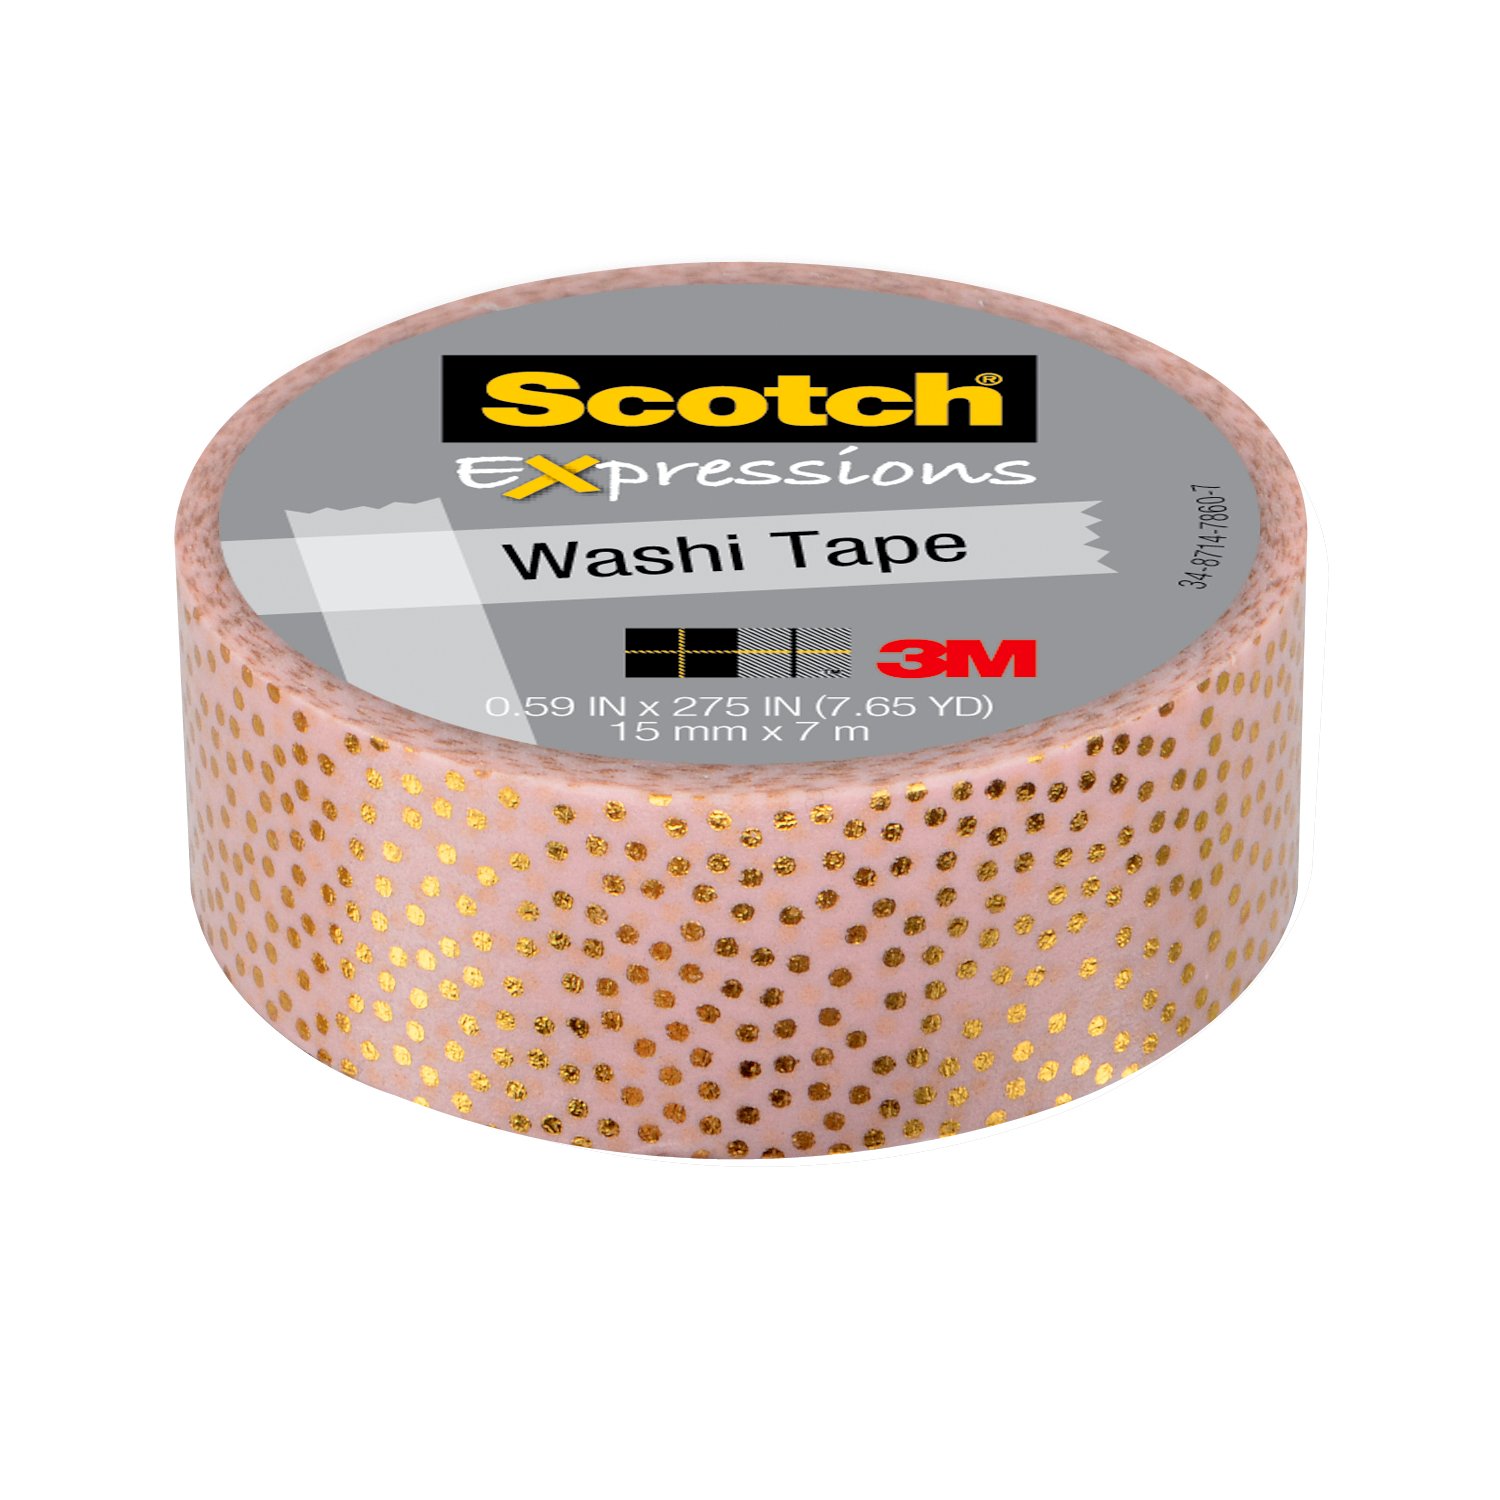 7100096962 - Scotch Expressions Washi Tape C614-P2, Pastel Pink with Gold Foil Dots